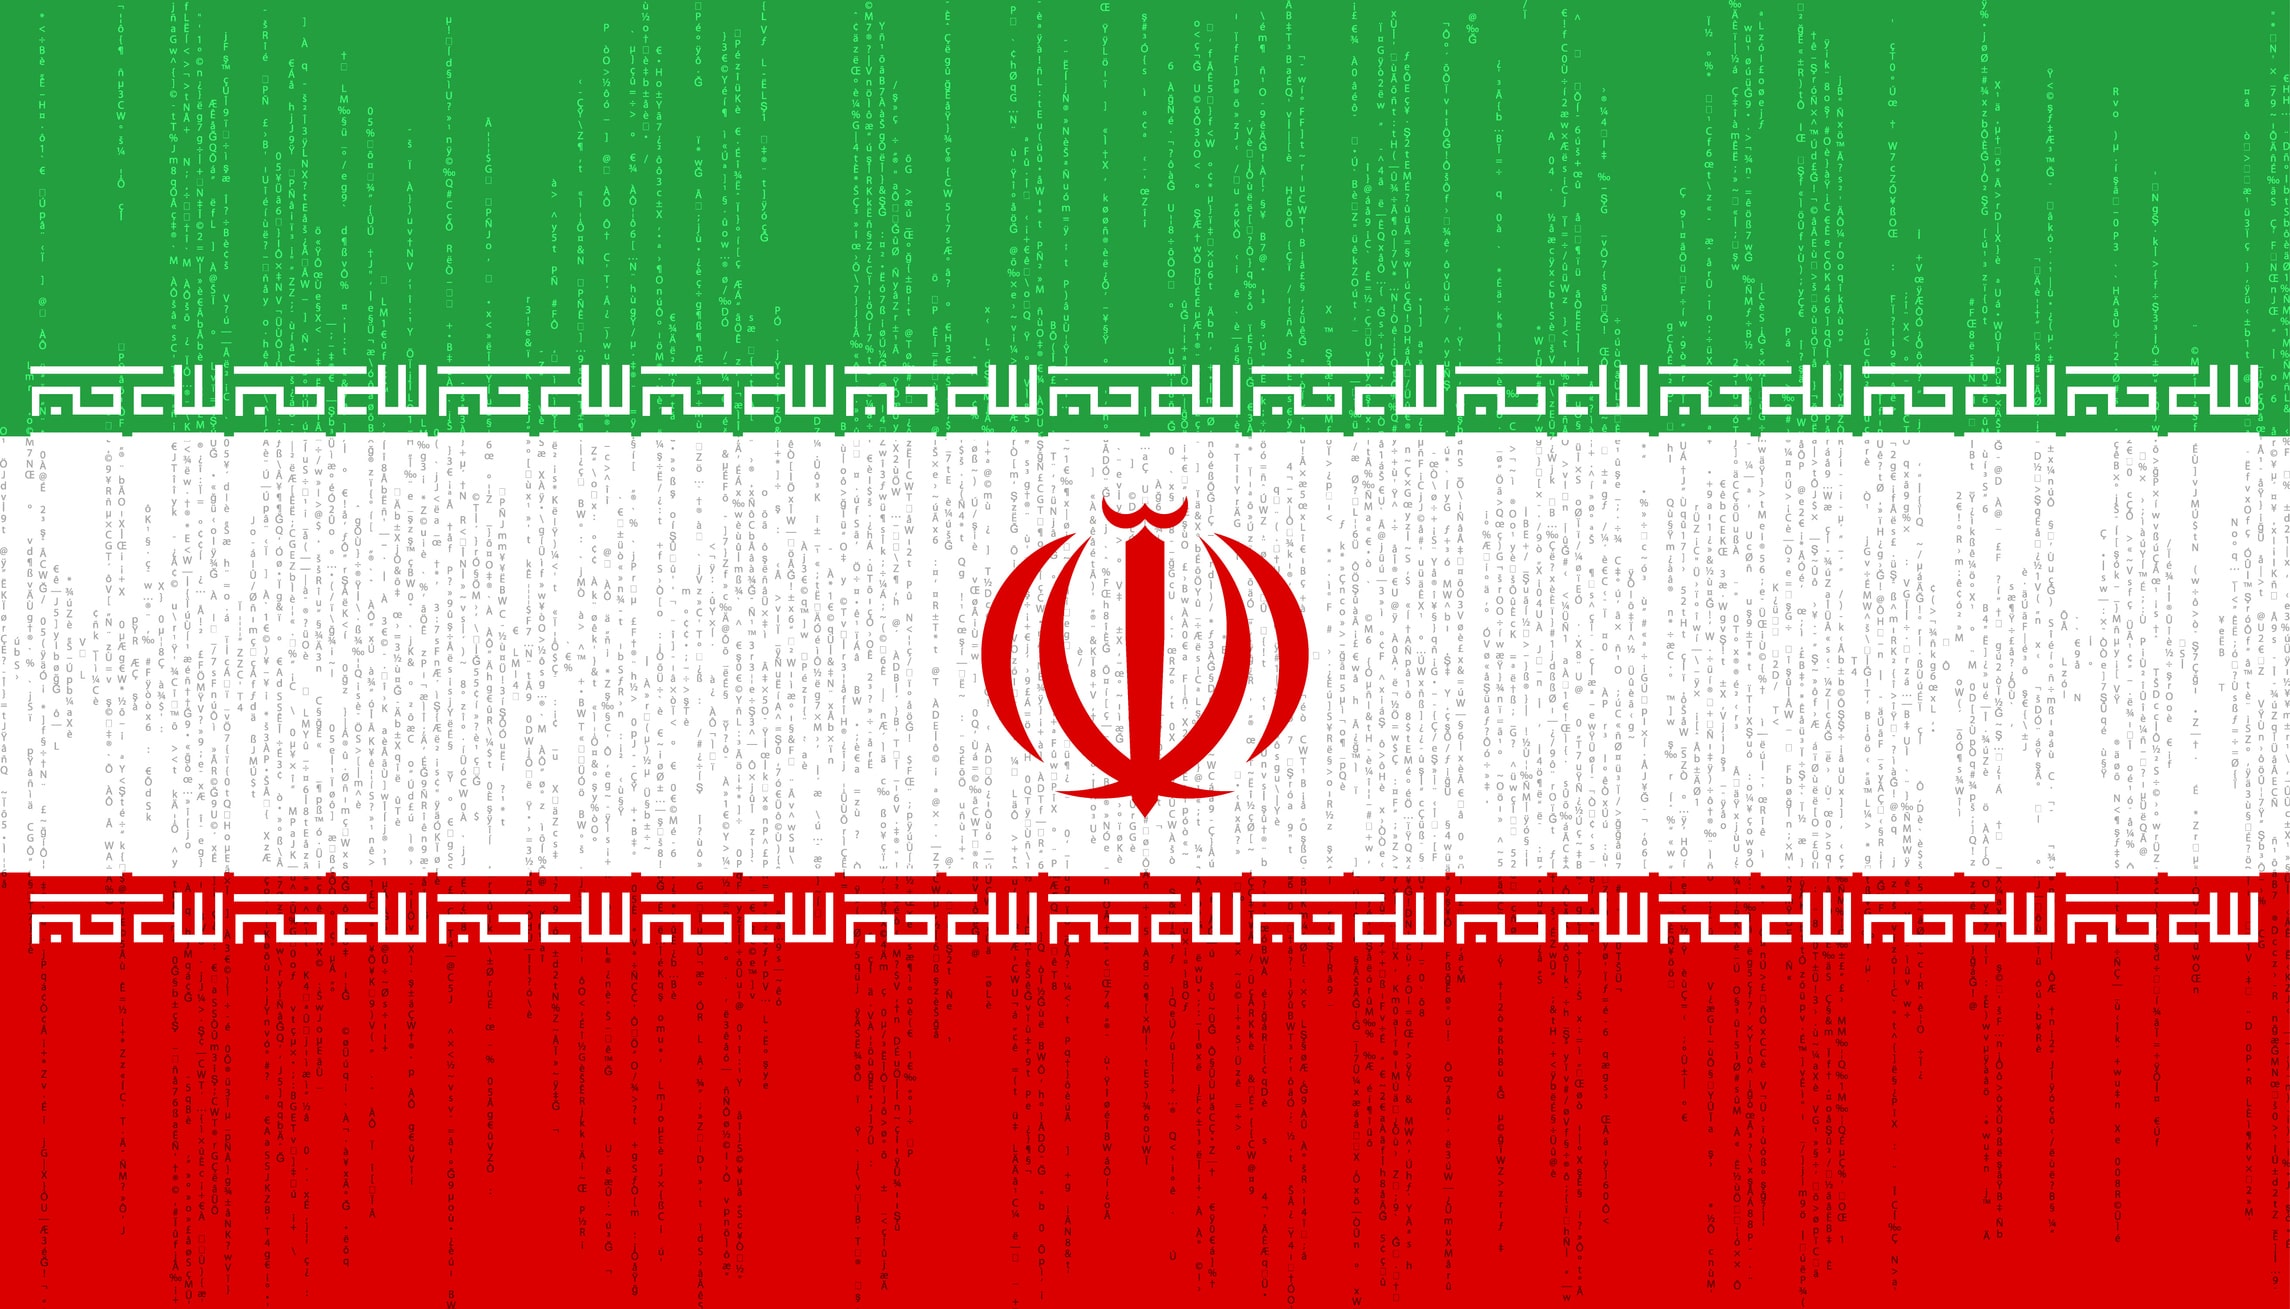 takian.ir iran based hackers caught carrying out destructive attacks under ransomware guise 1